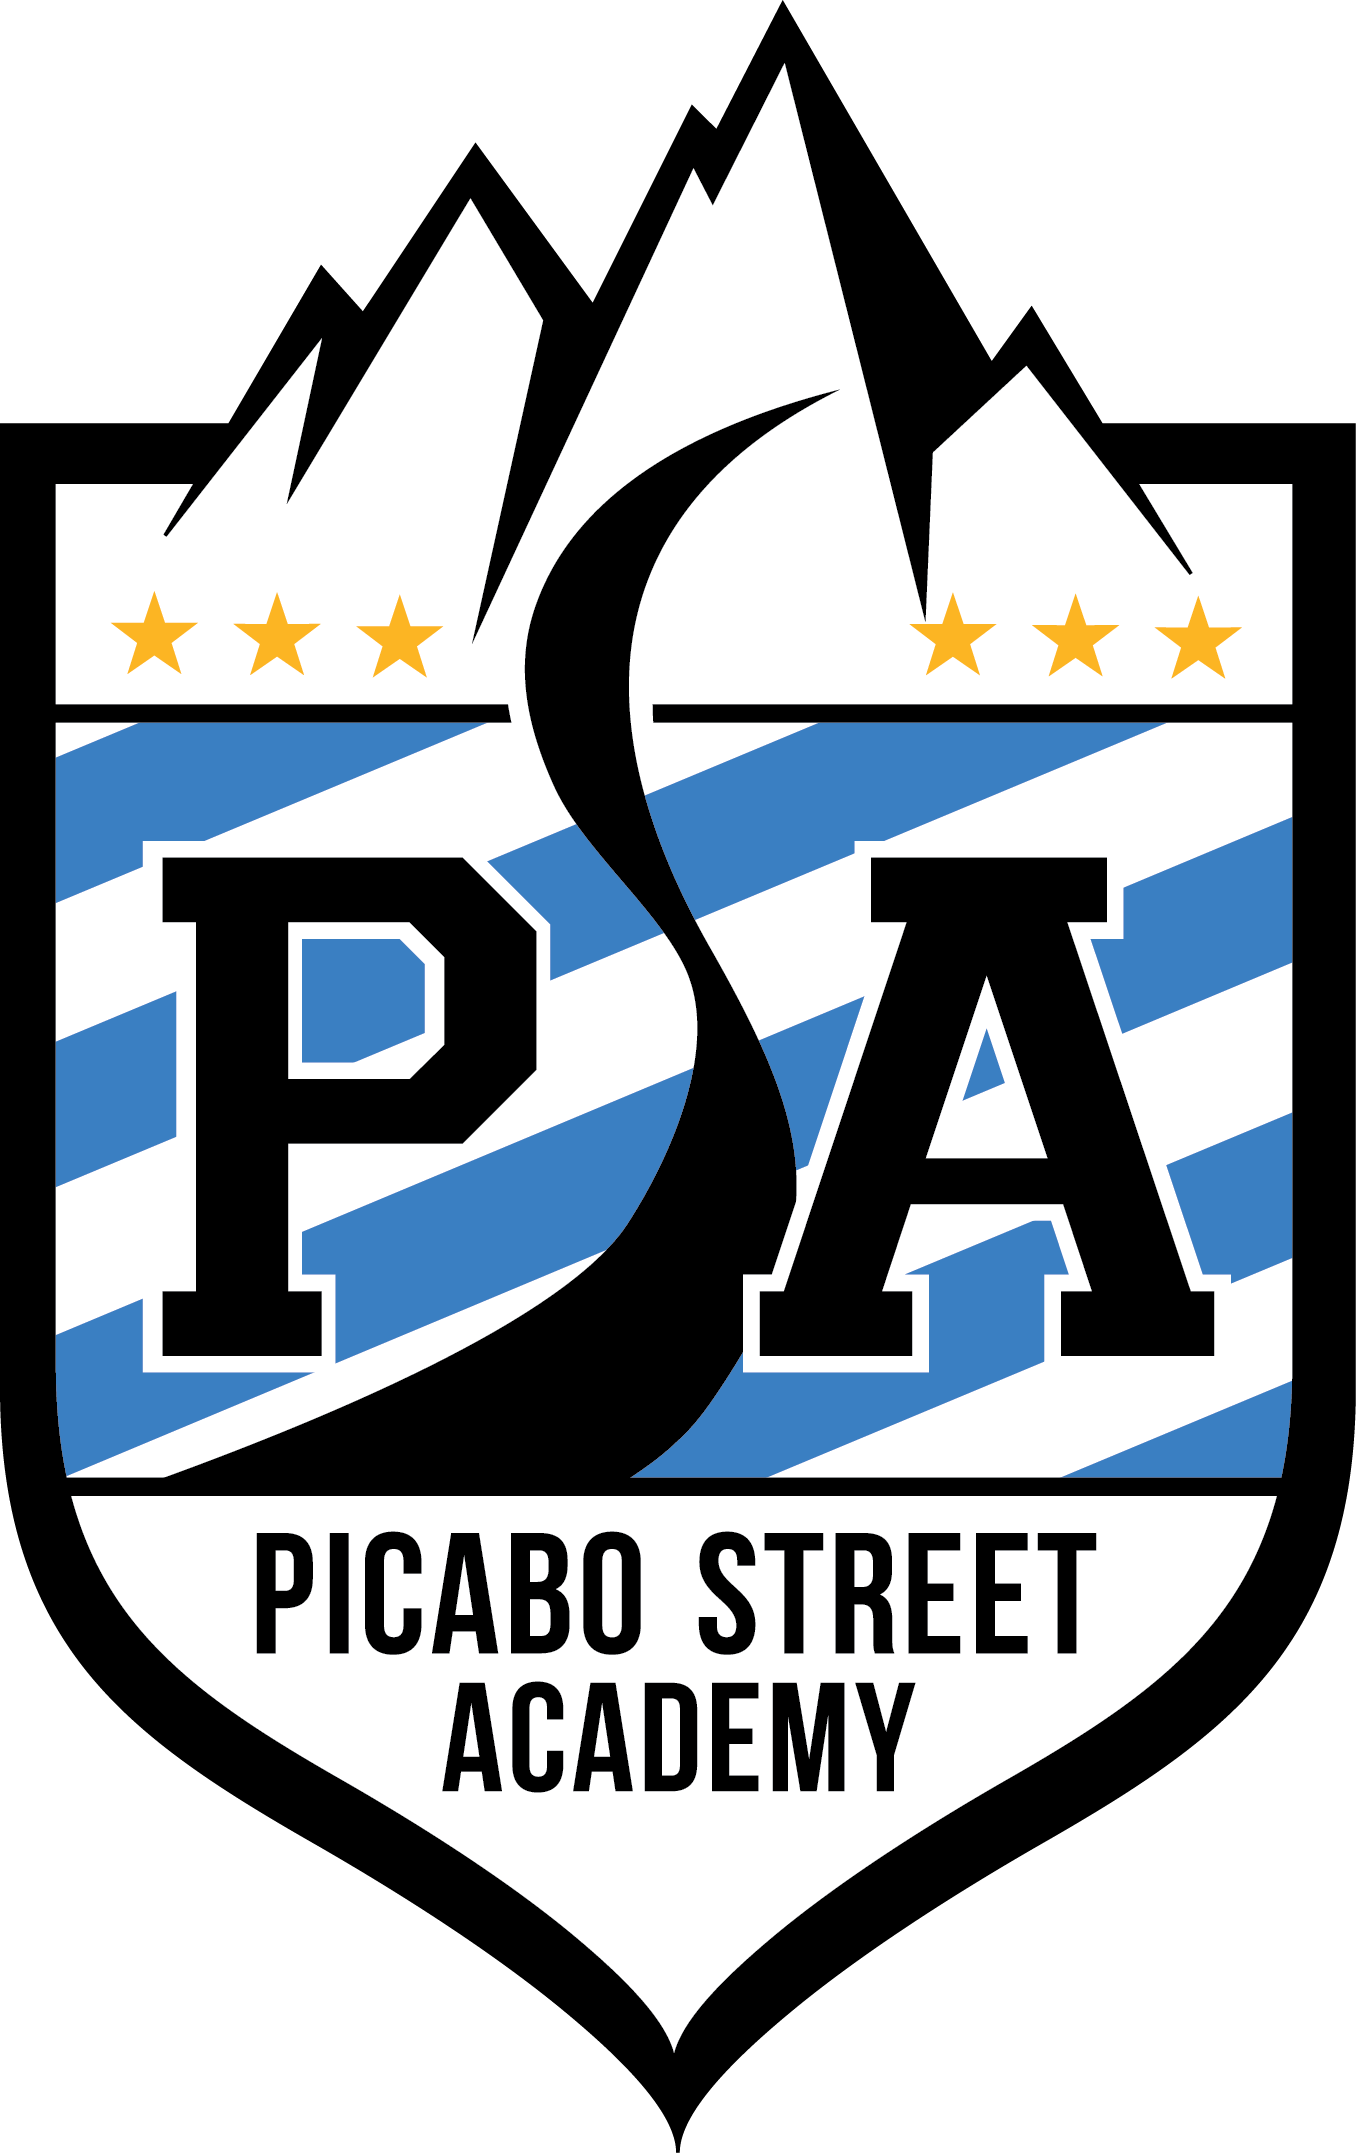 Picabo Street Academy